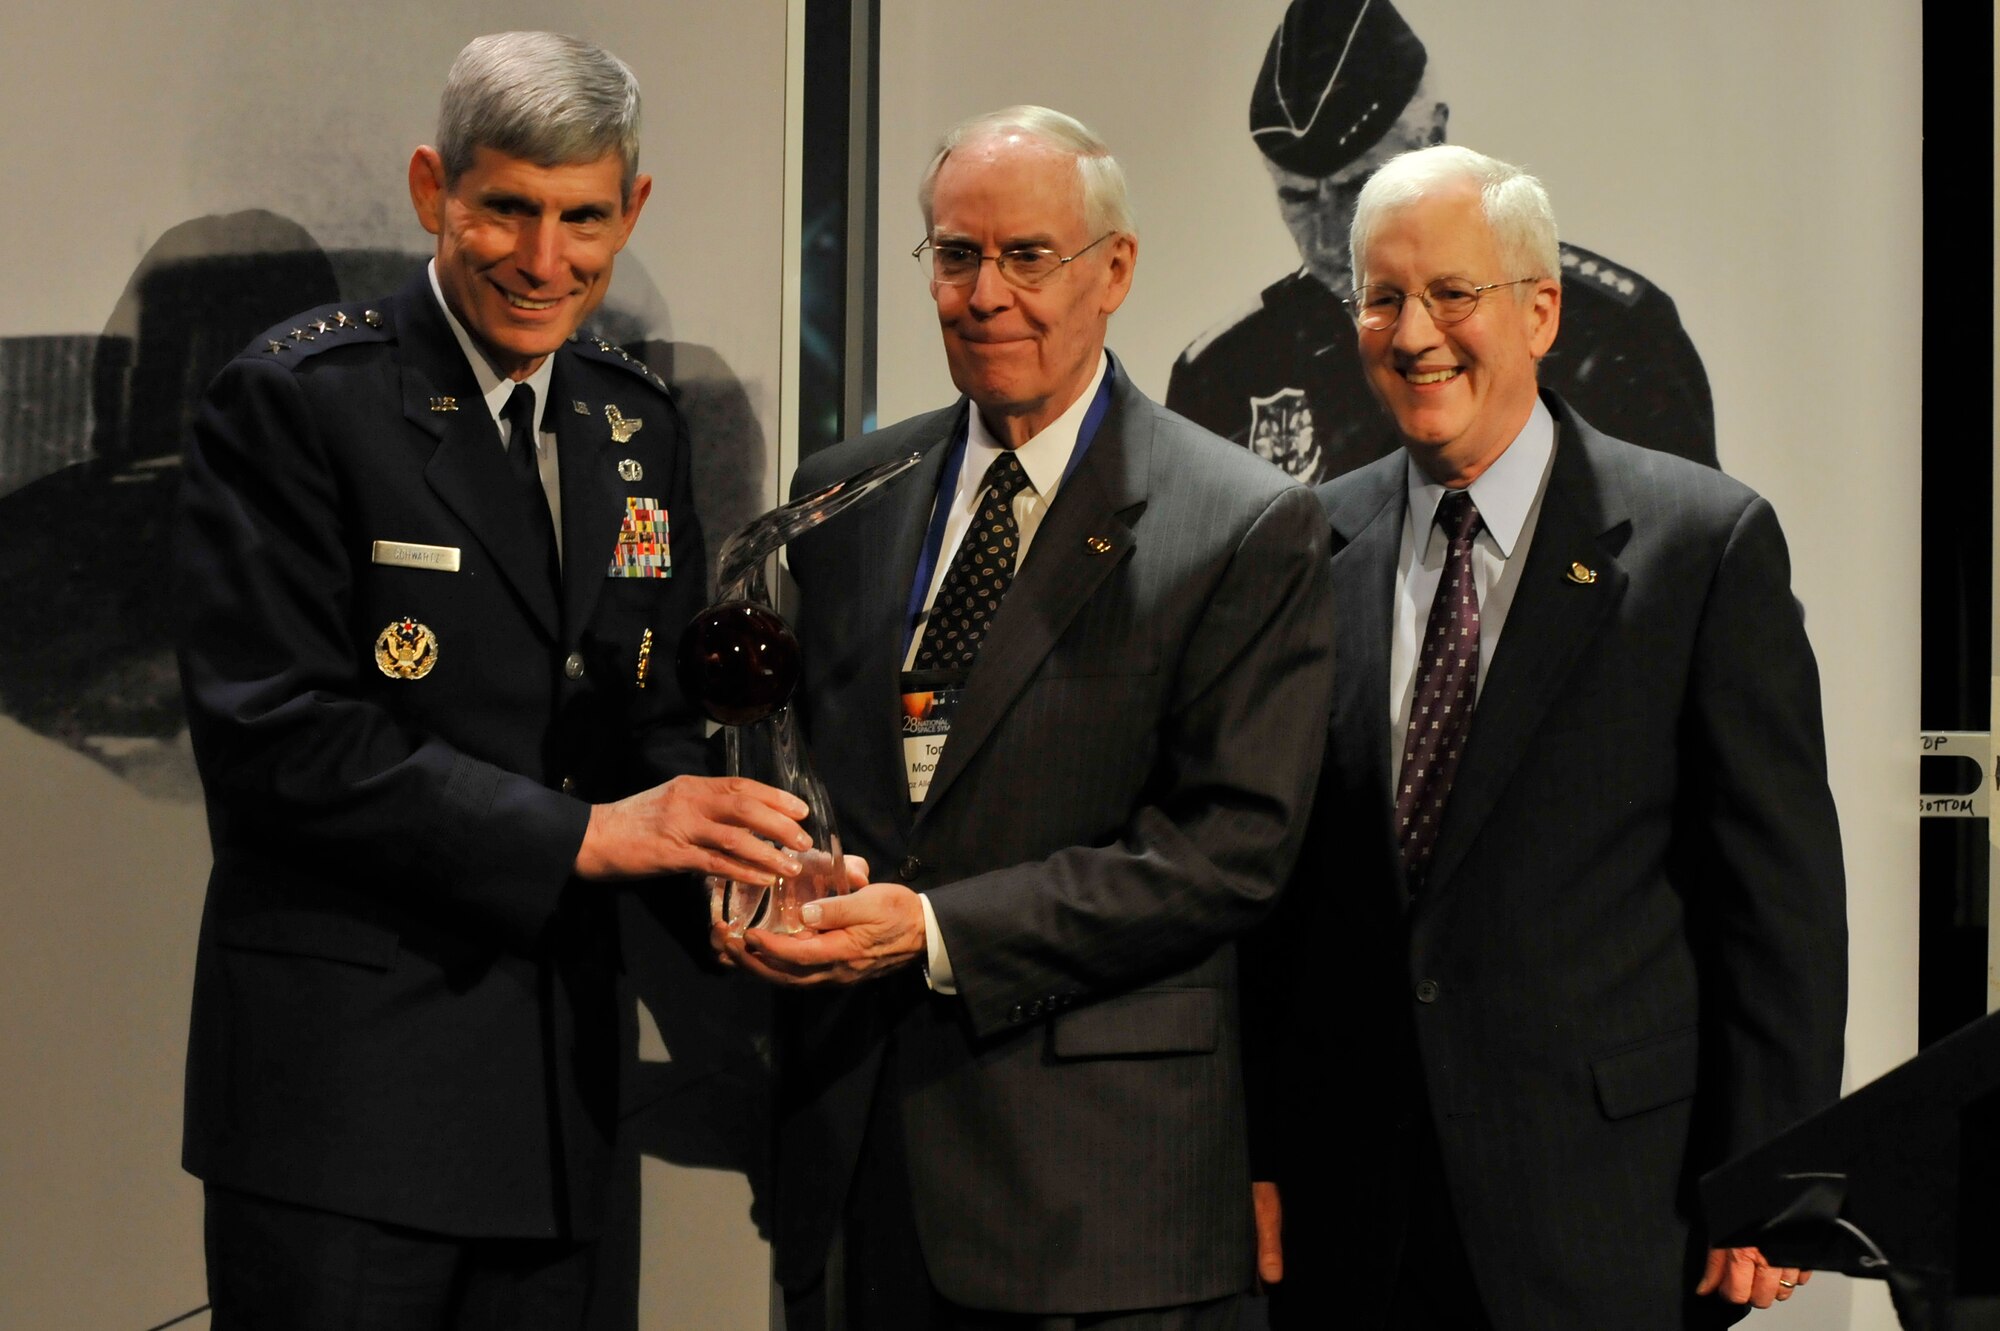 Air Force Chief of Staff Gen. Norton Schwartz presents retired Gen. Thomas S. Moorman Jr. (center) with the Gen. James E. Hill Lifetime Space Achievement Award April 18, 2012, at the 28th National Space Symposium in Colorado Springs, Colo.  With them is Martin Faga, chairman of the board for the Space Foundation.  The award is the highest honor bestowed by the Space Foundation, a nonprofit organization that supports the global space industry through information and education programs.  When he retired in August 1997, Moorman was Air Force vice chief of staff.  He previously served as Air Force Space Command commander and vice commander.  (U.S. Air Force photo by Staff Sgt. Christopher Boitz/Released)

